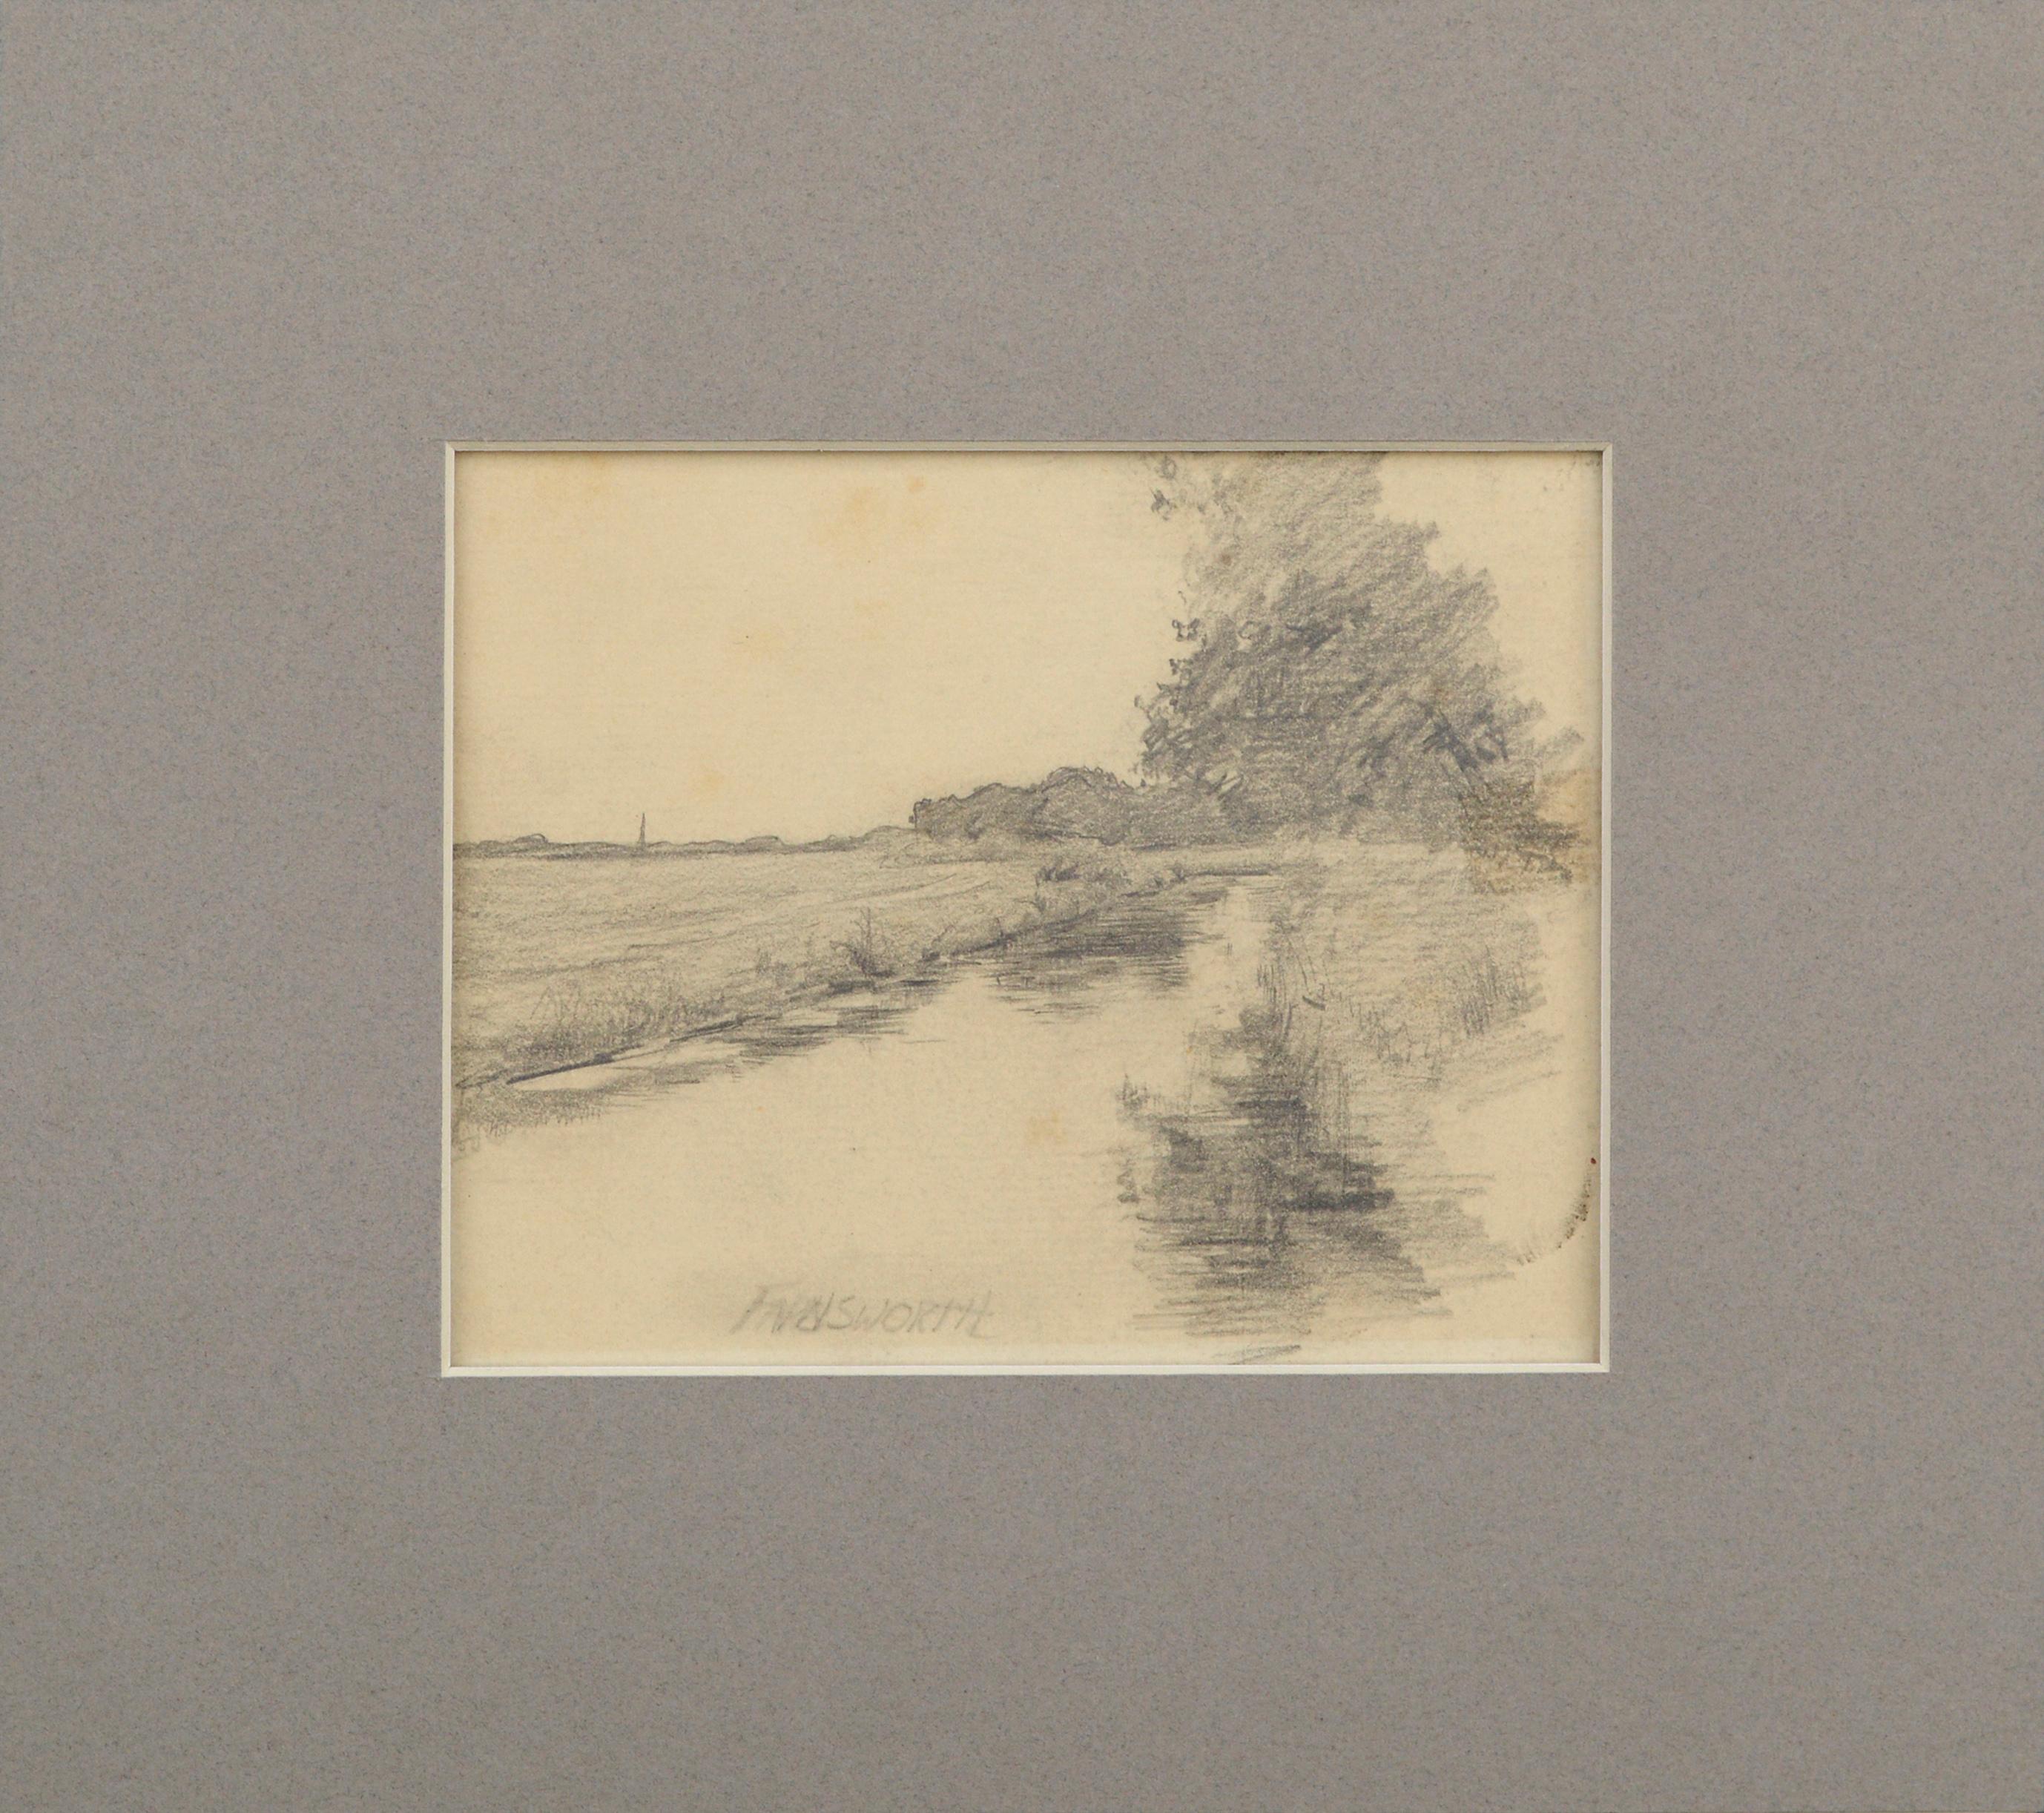 Reflections in the Pond 19th Century Pencil Drawing by Alfred Villiers Farnsworth
19th century drawing in pencil of reflections in a pond by Alfred Villiers Farnsworth (American/English, 1858 - 1908) 
signed "Farnsworth" at the bottom edge.